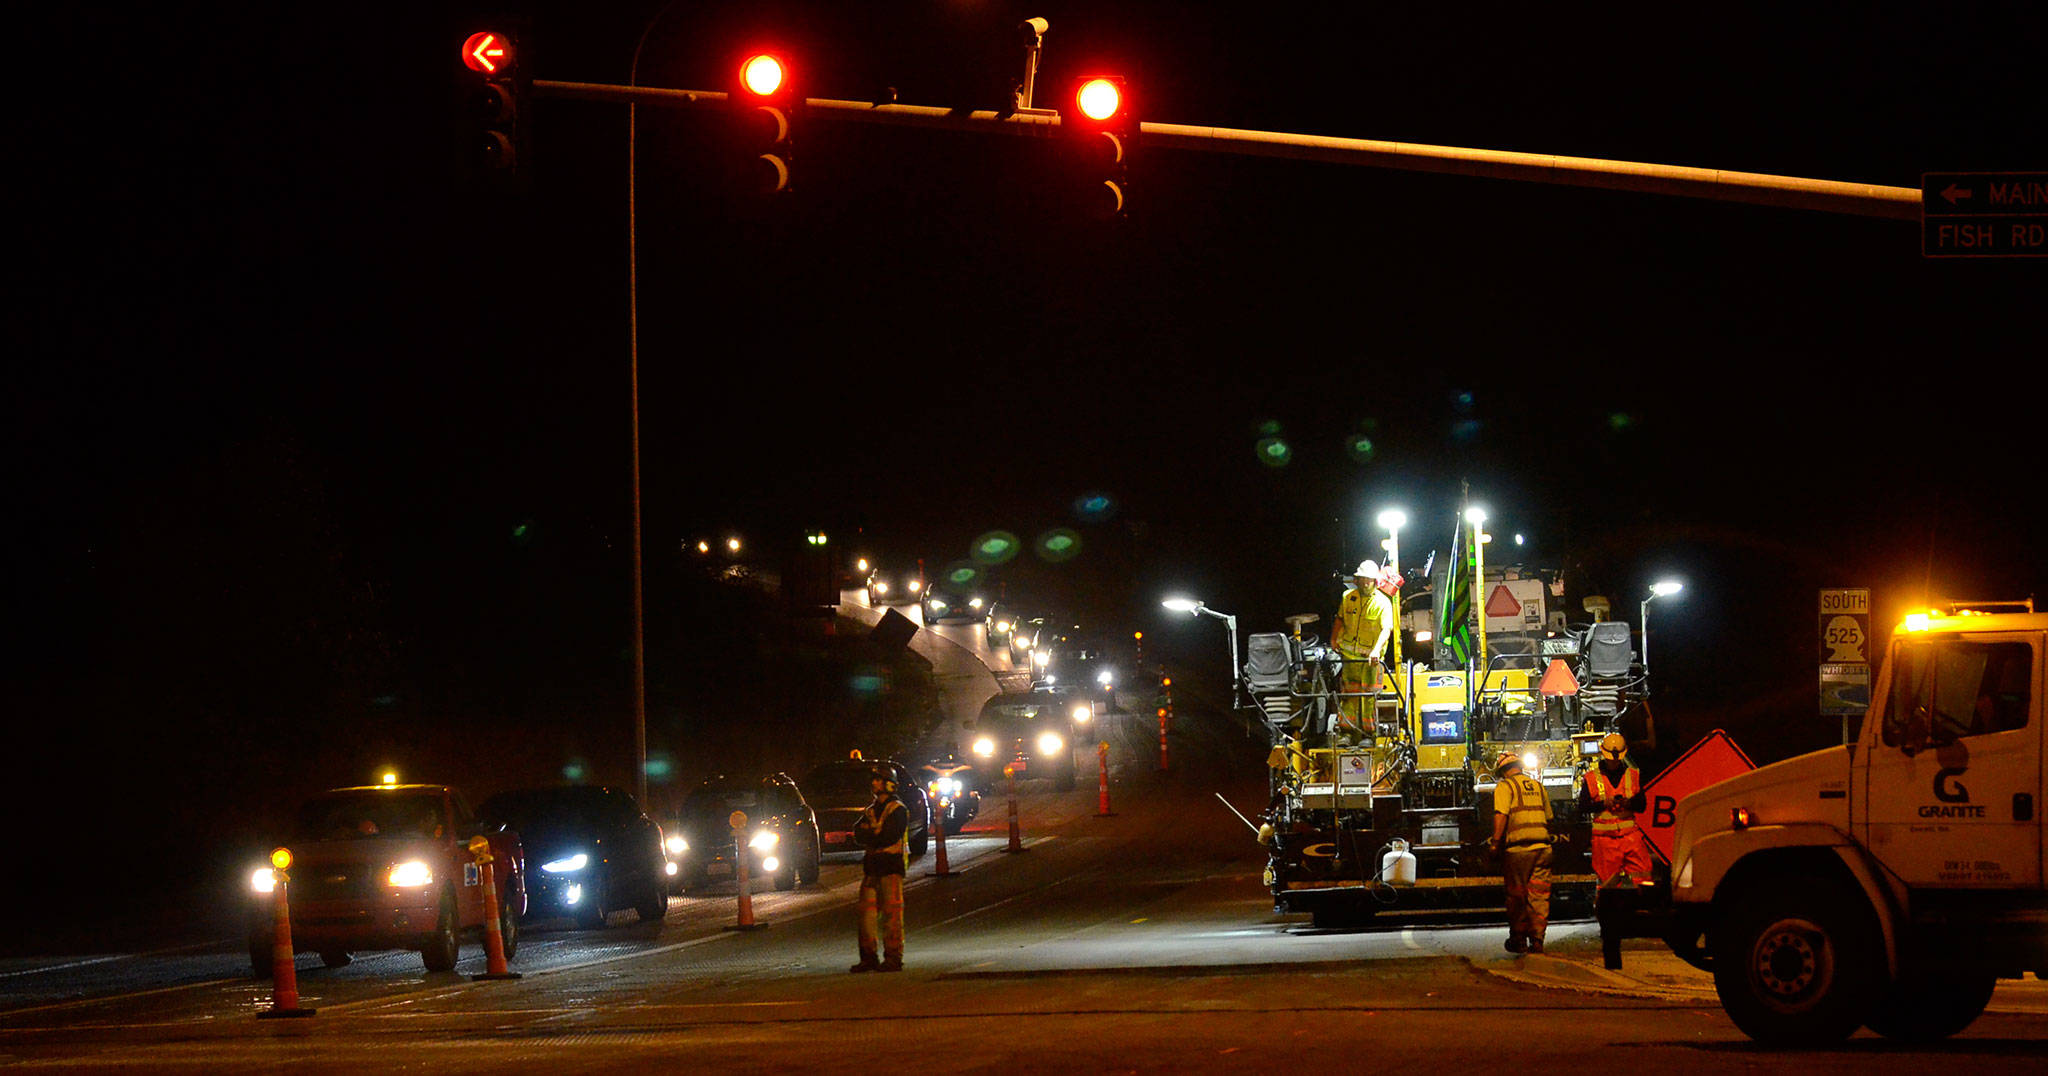 Justin Burnett/The Record — Granite Construction crews set up to pave the intersection at Highway 525 and Fish Road in Freeland on Thursday night. State officials say daytime work is largely over, and that project is set to conclude this fall.